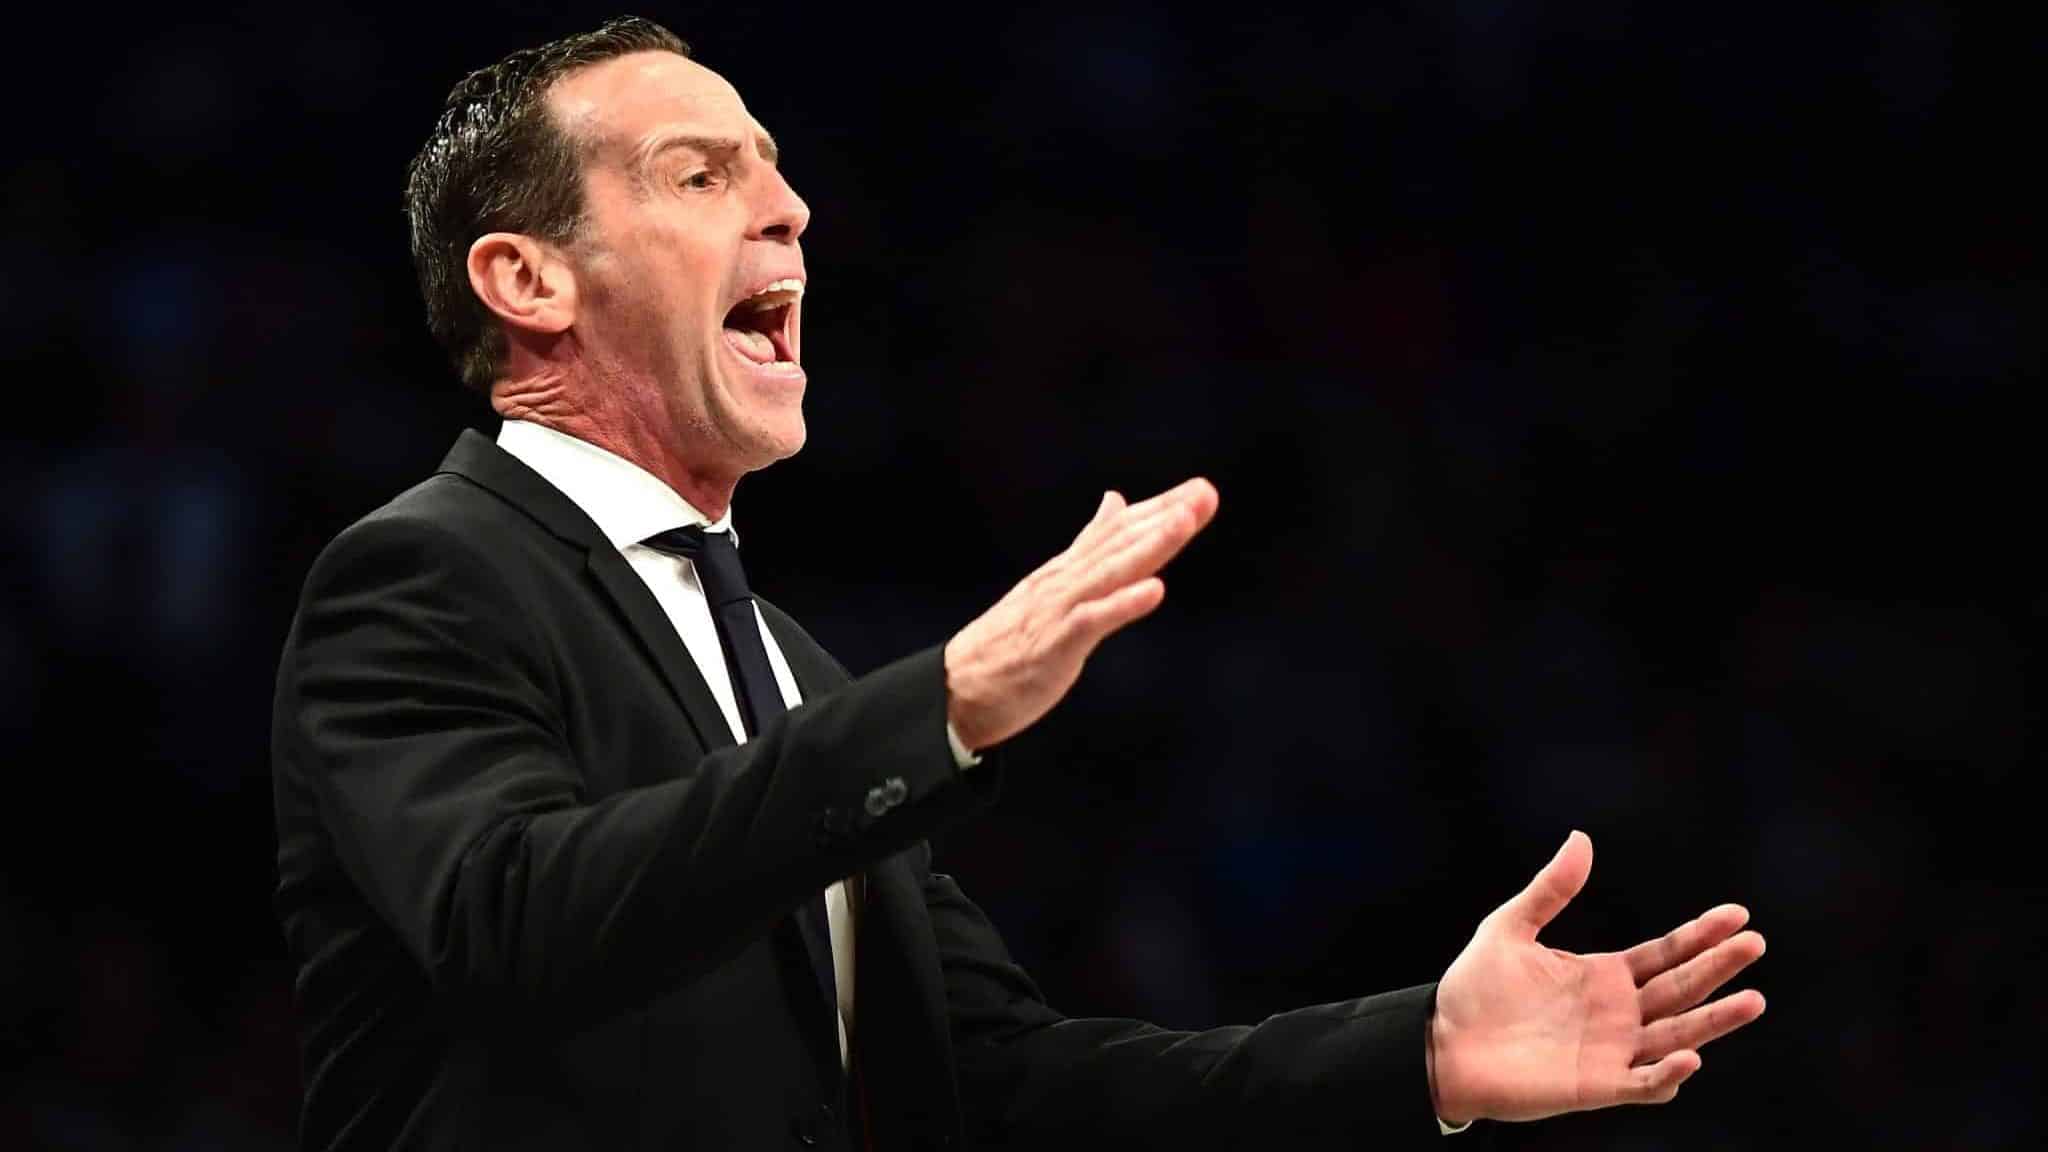 NEW YORK, NEW YORK - OCTOBER 23: Brooklyn Nets head coach Kenny Atkinson reacts during the first half of their game against the Minnesota Timberwolves at Barclays Center on October 23, 2019 in the Brooklyn borough of New York City. NOTE TO USER: User expressly acknowledges and agrees that, by downloading and or using this photograph, User is consenting to the terms and conditions of the Getty Images License Agreement.